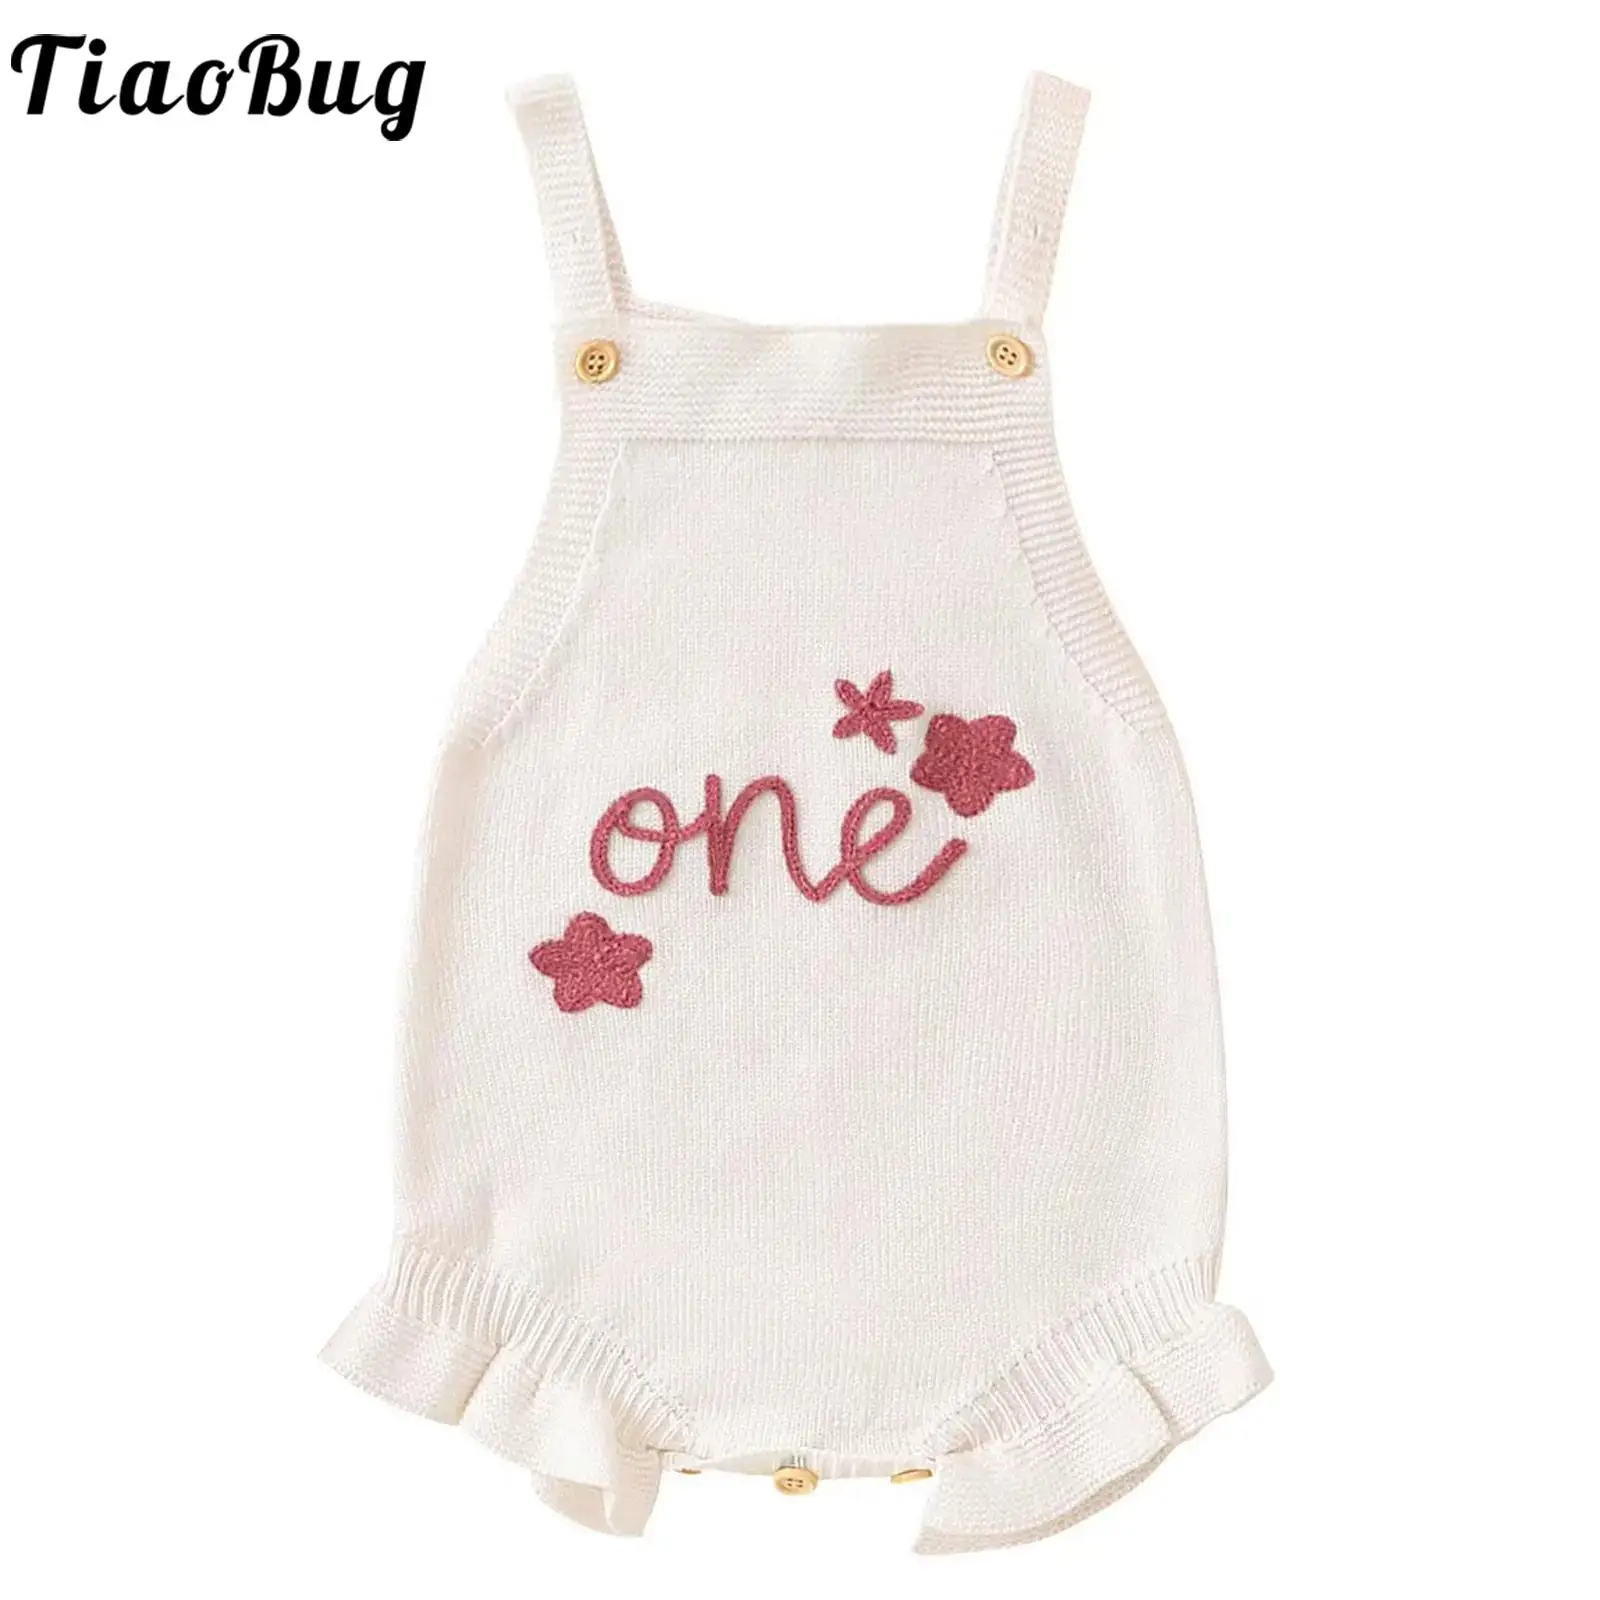 

Infant Baby Girl 1st Birthday Outfits Sleeveless Knit Sweater Romper Embroidery Ruffle Cake Smash Bodysuit for Christening Party